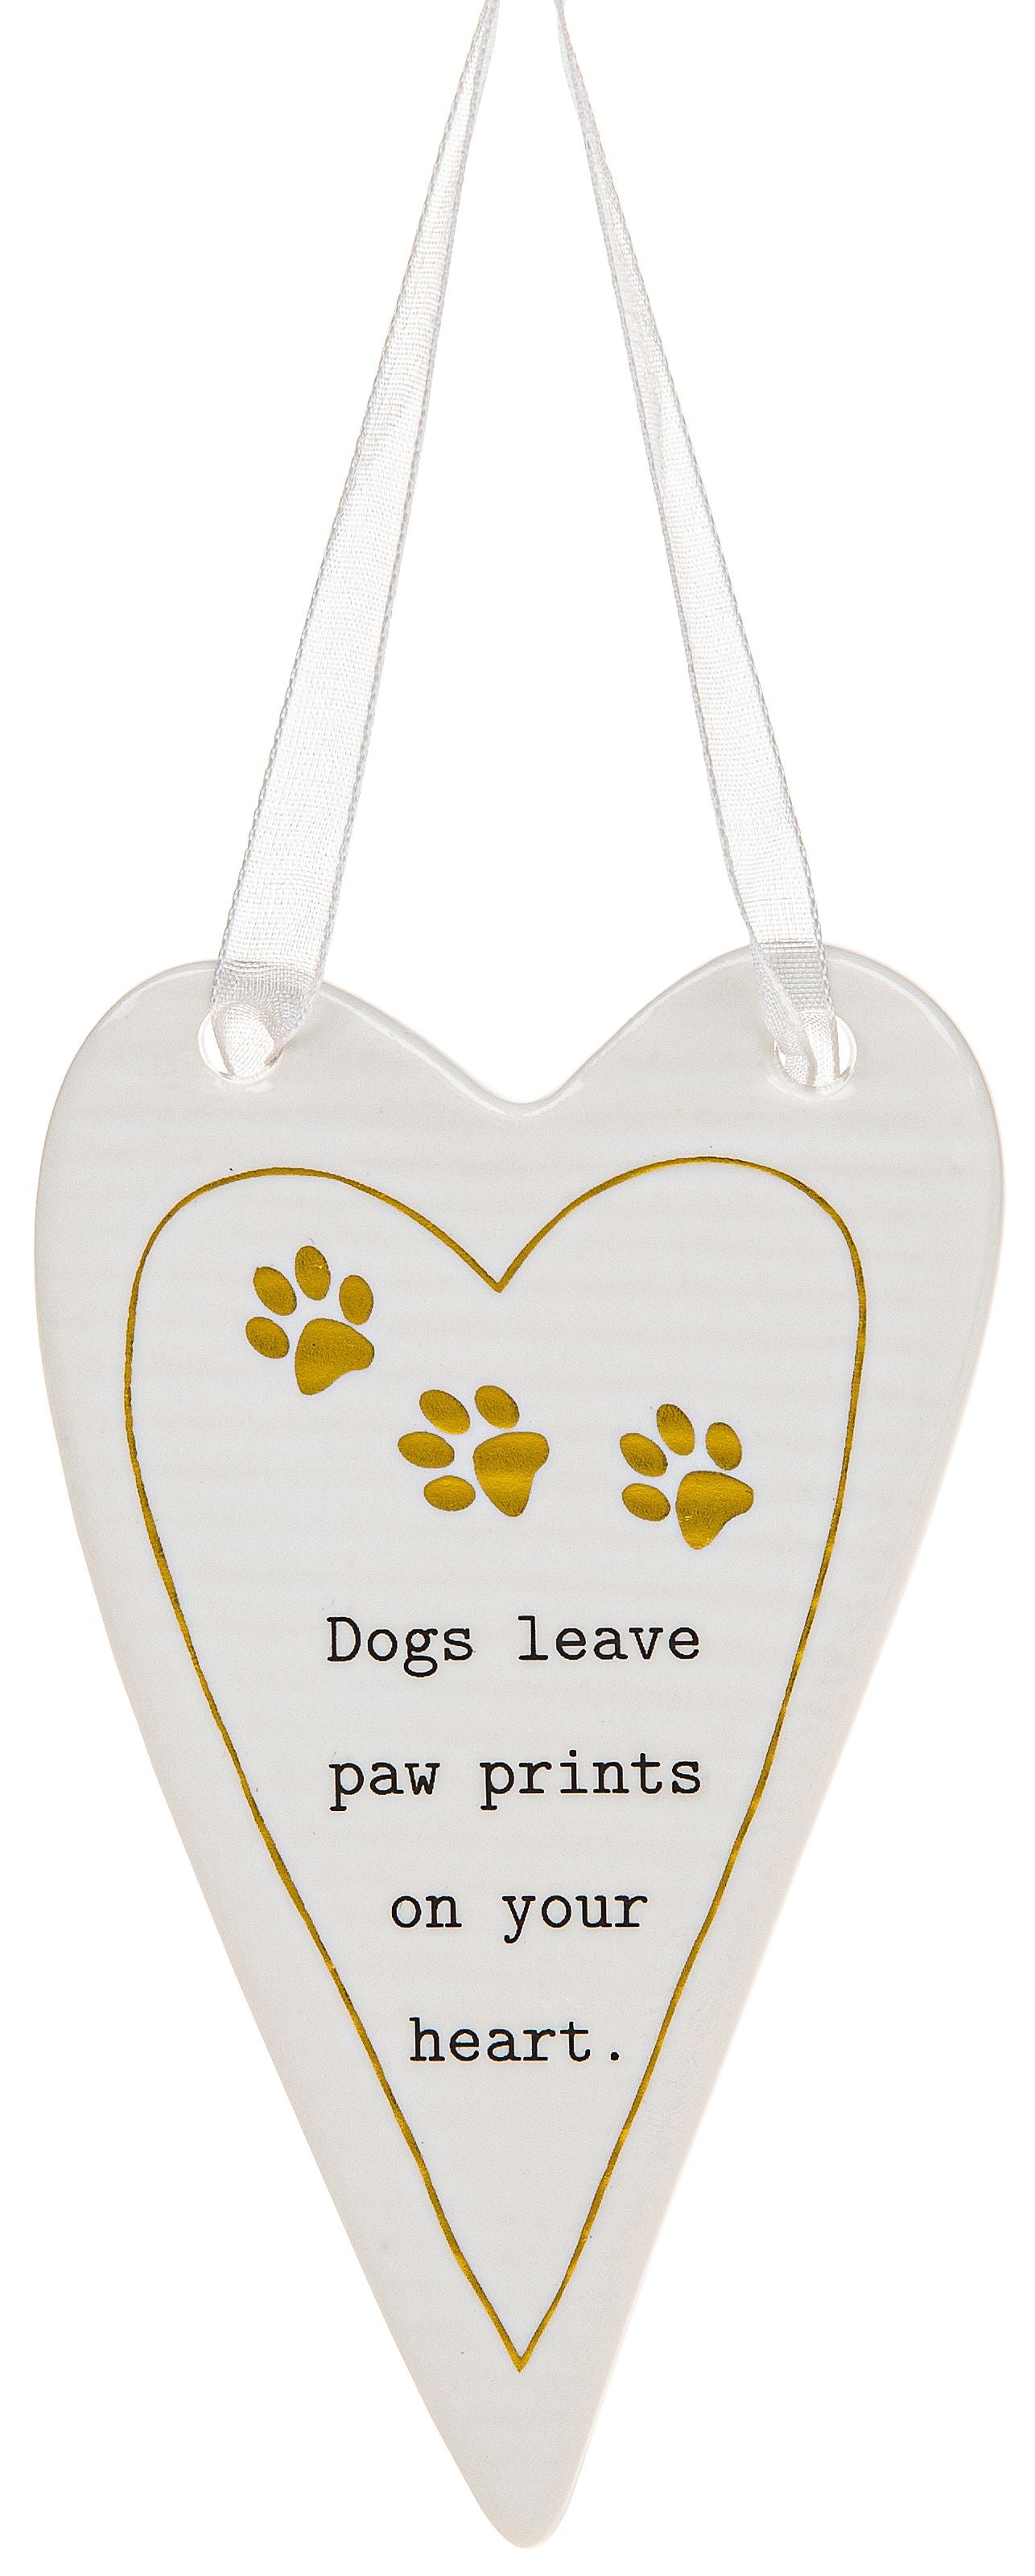 Ceramic Heart Plaque - Dogs Leave Paw Prints